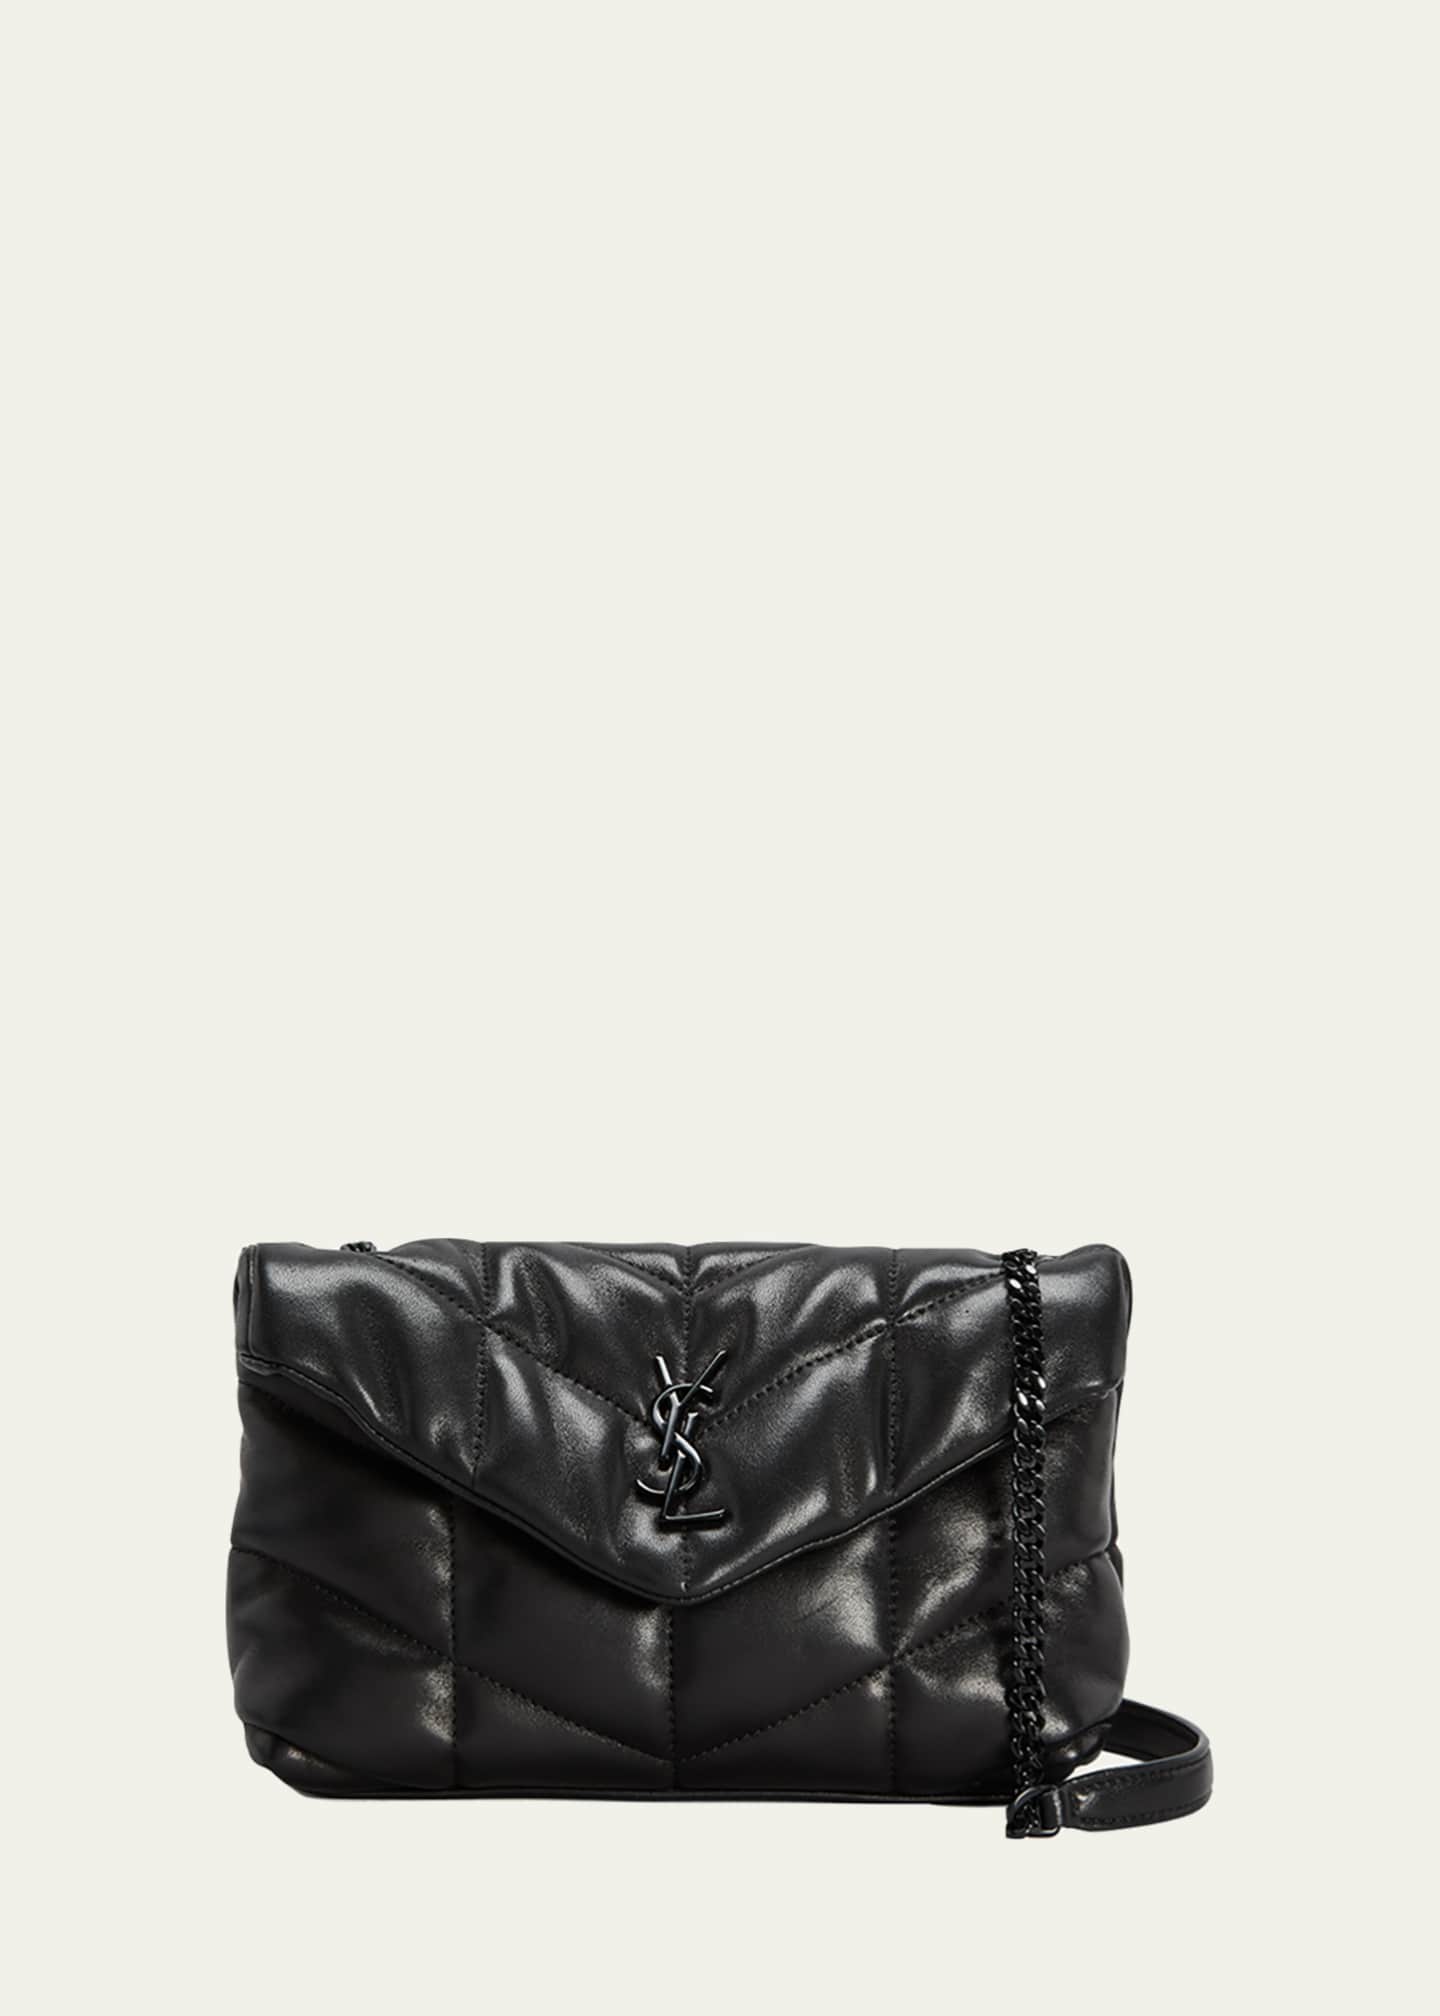 Saint Laurent Loulou Toy YSL Puffer Leather Crossbody Bag - Bergdorf ...